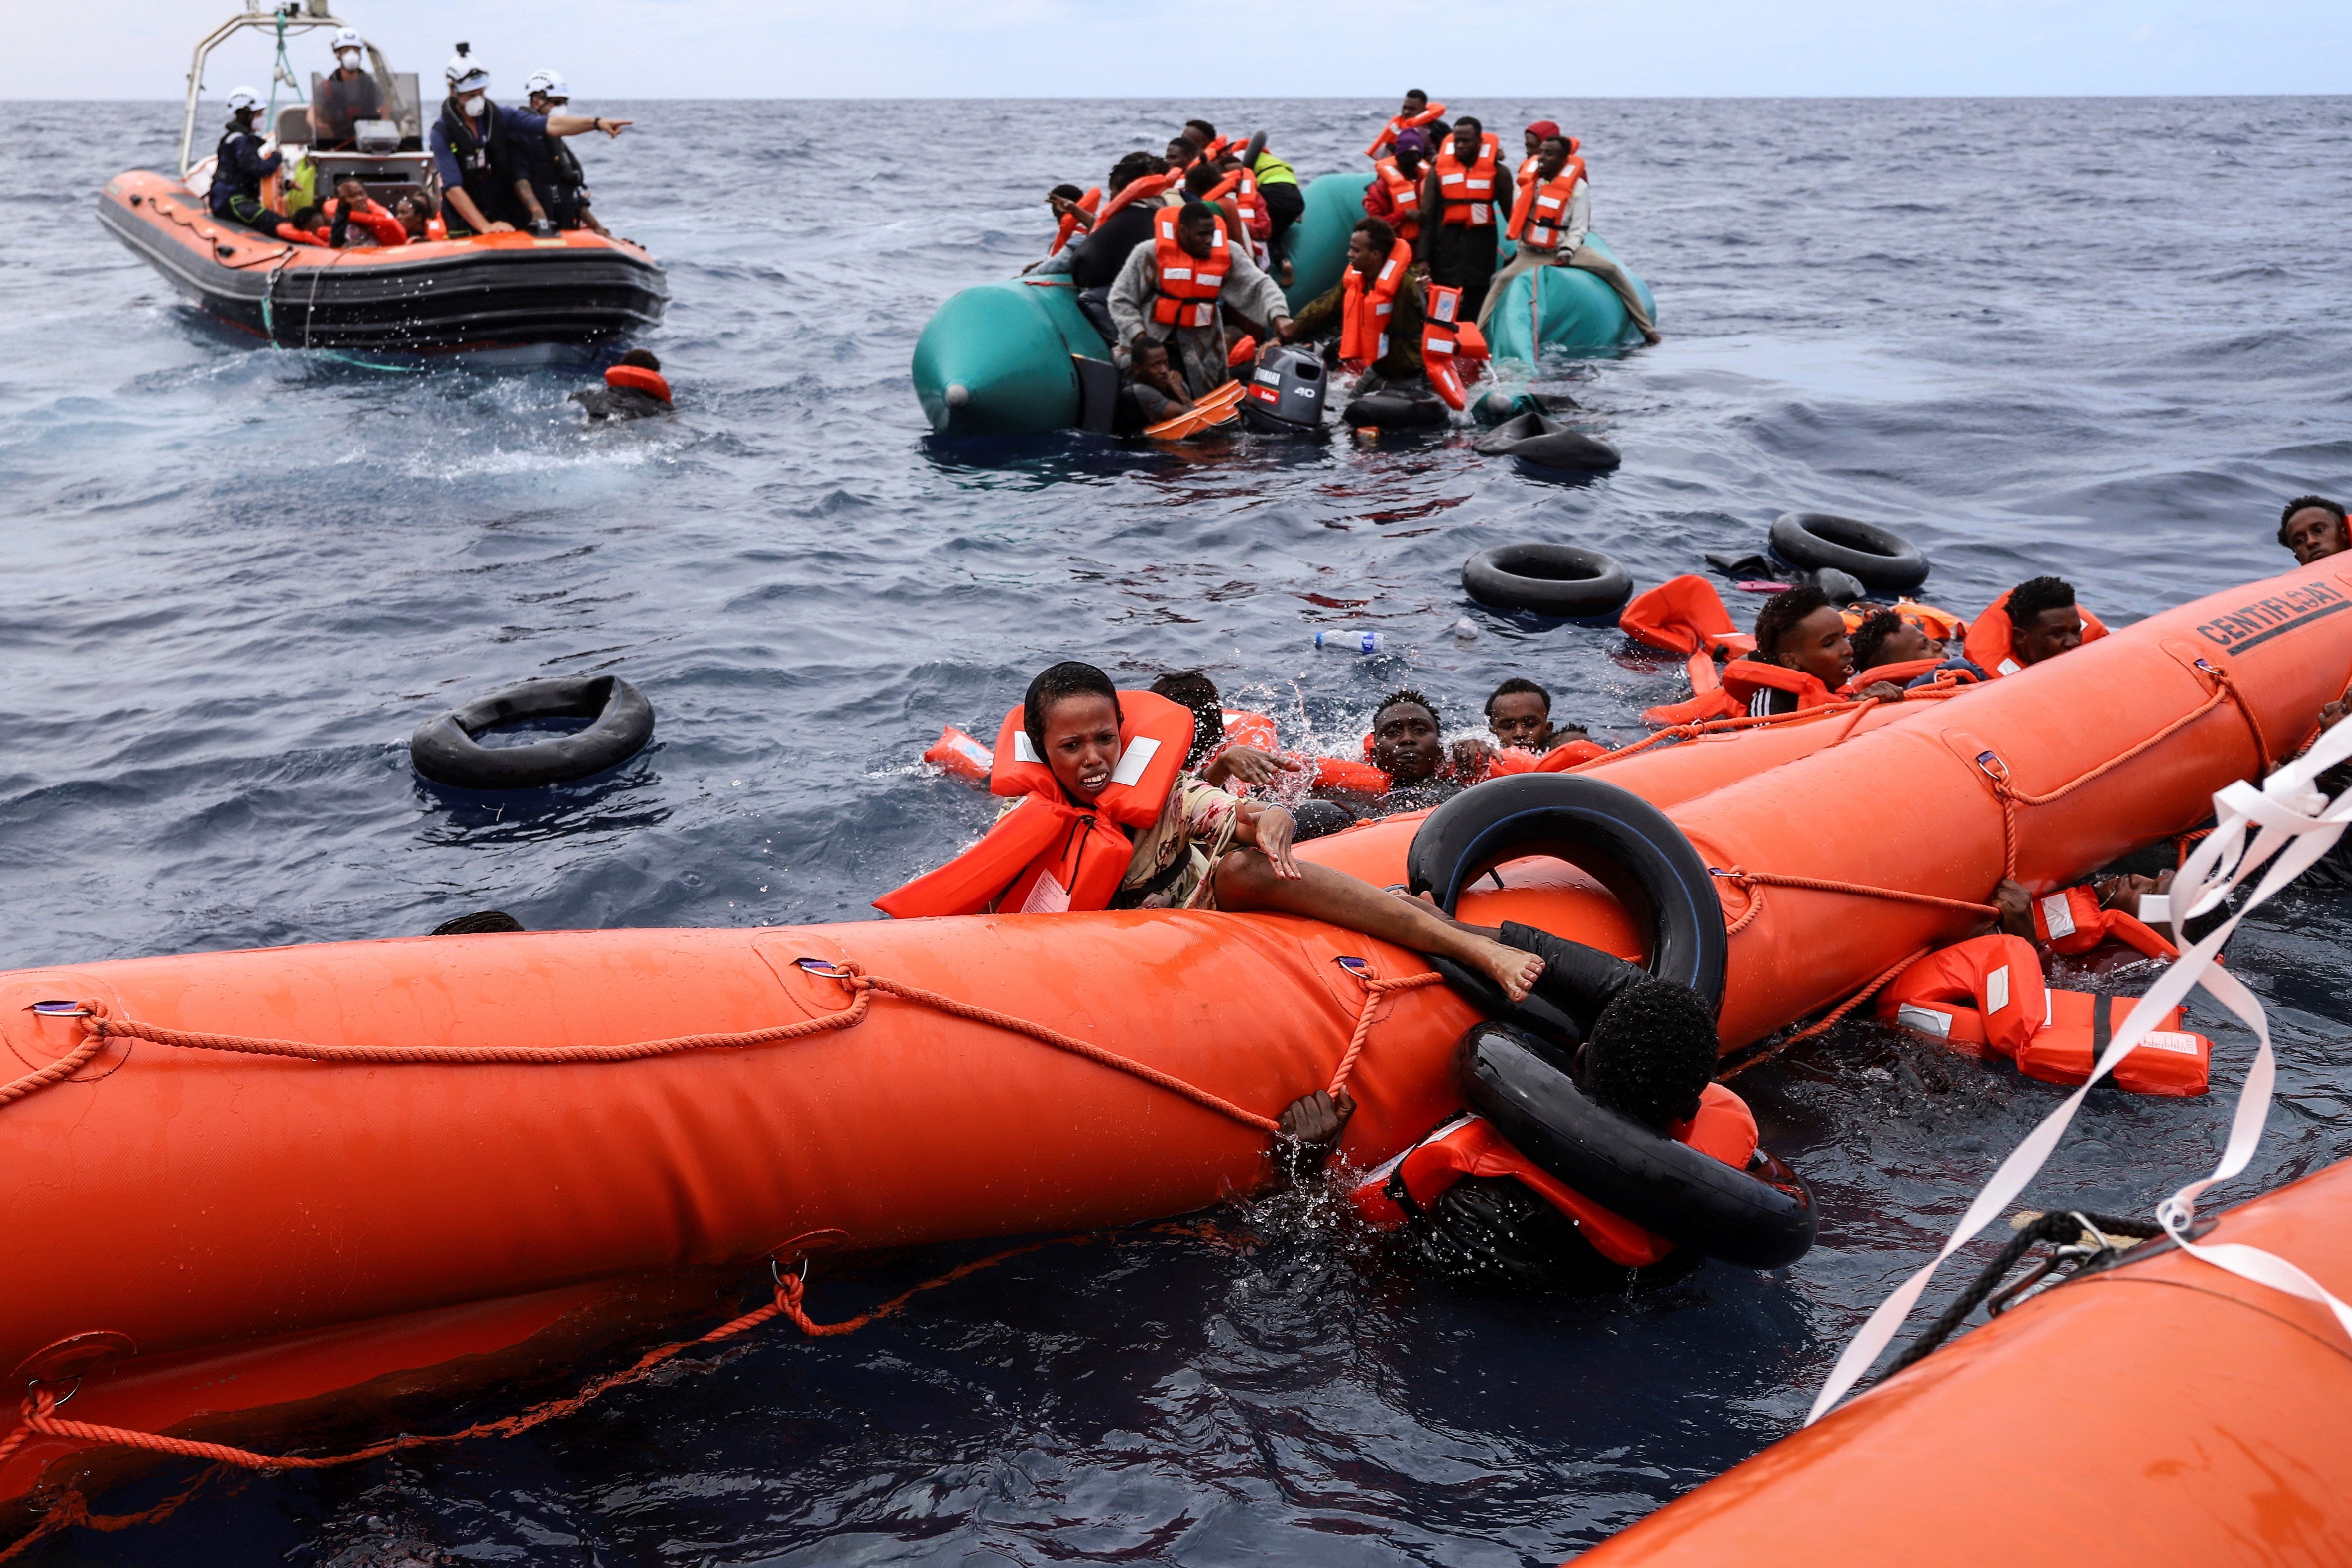 Migrants aboard a rubber boat end up in the water while others cling on to a centifloat before being rescued by a team of the Sea Watch-3, around 35 miles away from Libya, October 18, 2021 (AP)